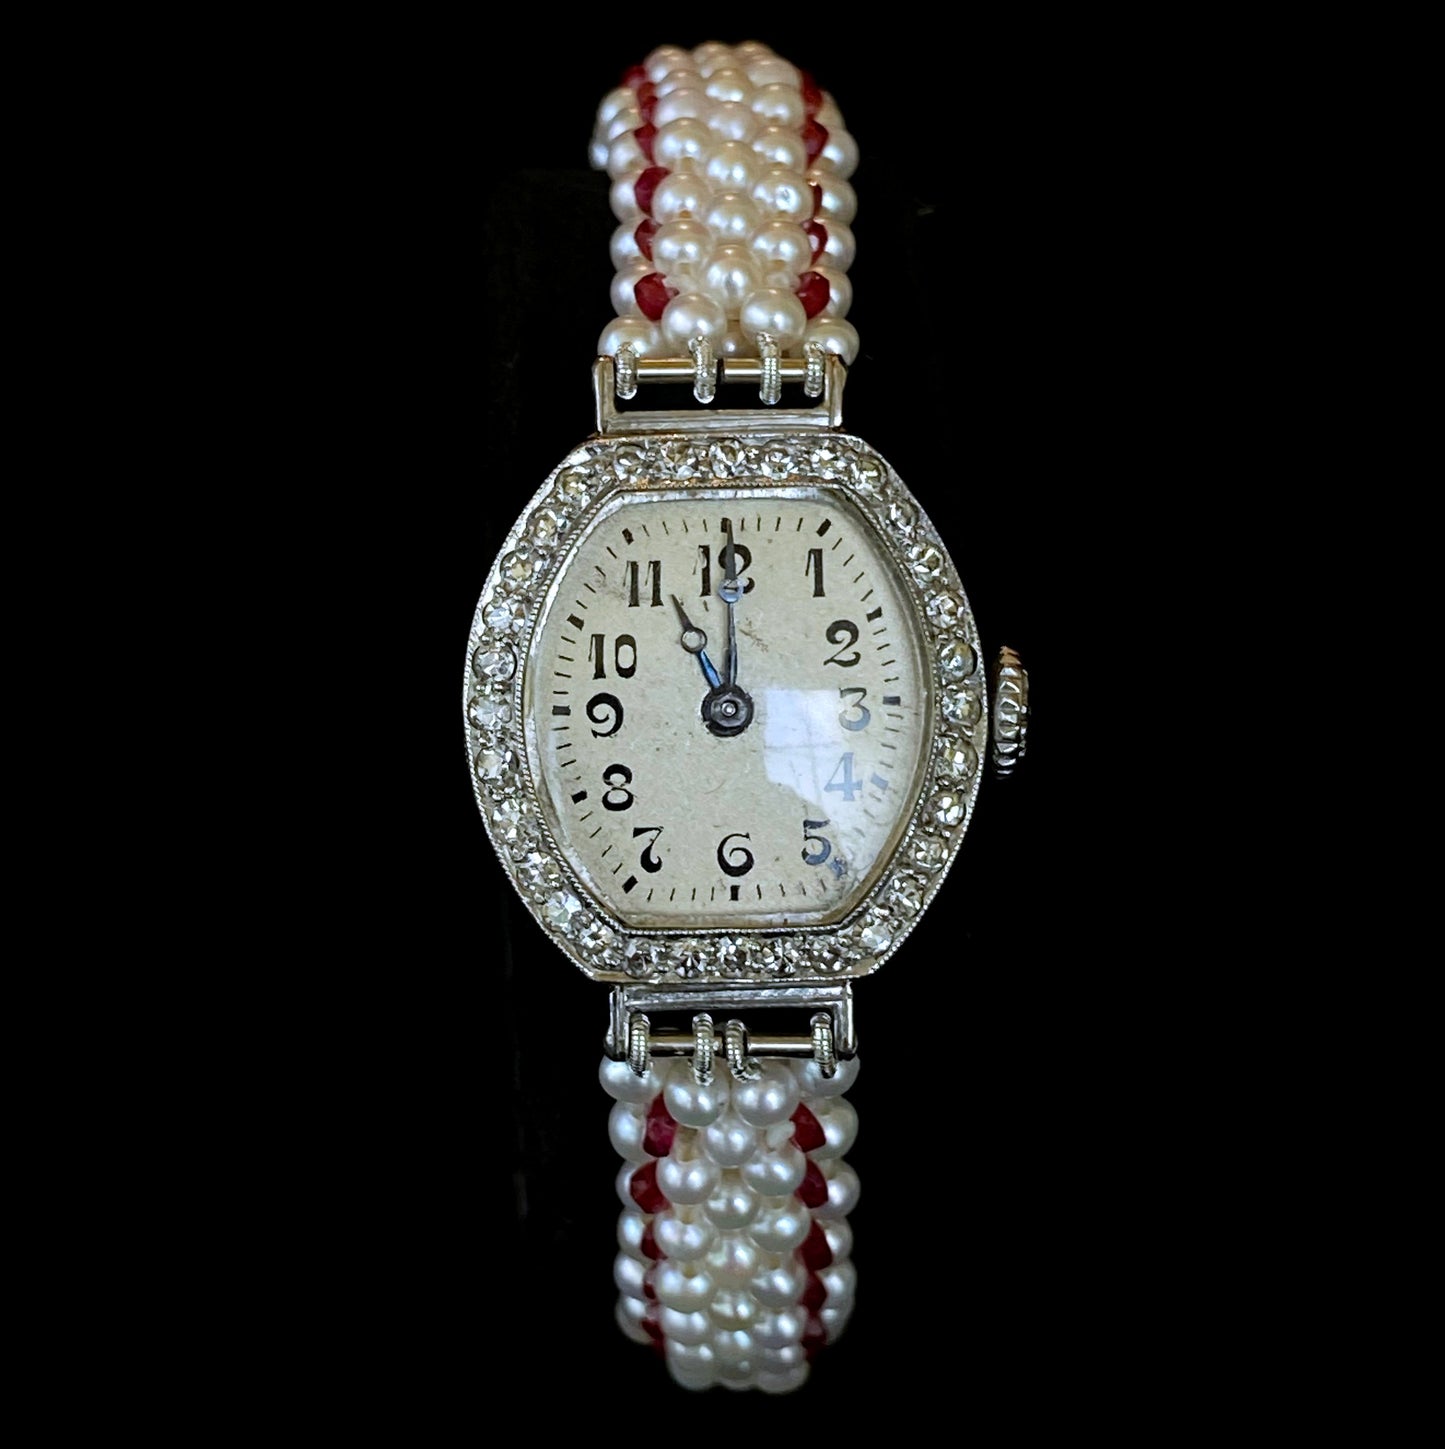 Marina J. Diamond Encrusted Watch with Pearl, Ruby & 14k White Gold